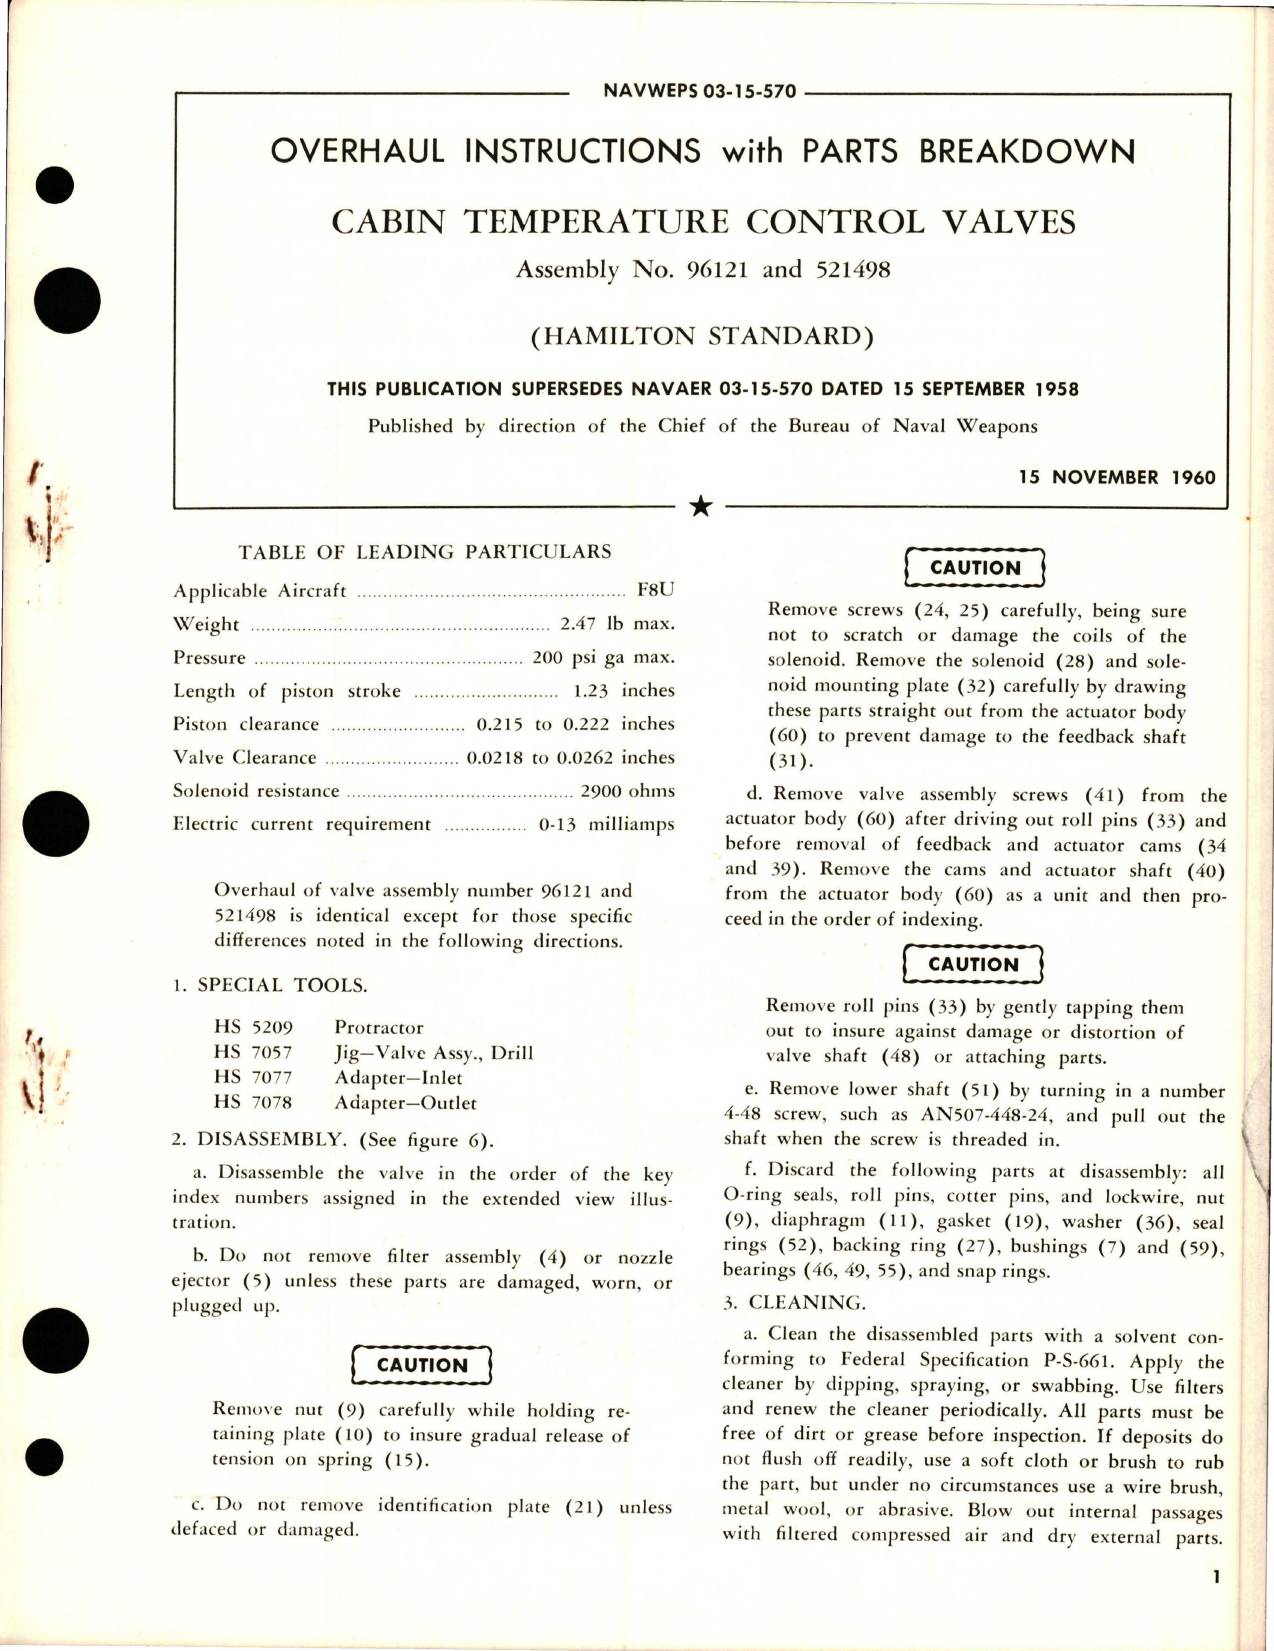 Sample page 1 from AirCorps Library document: Overhaul Instructions with Parts for Cabin Temperature Control Valves - Assembly 96121 and 521498